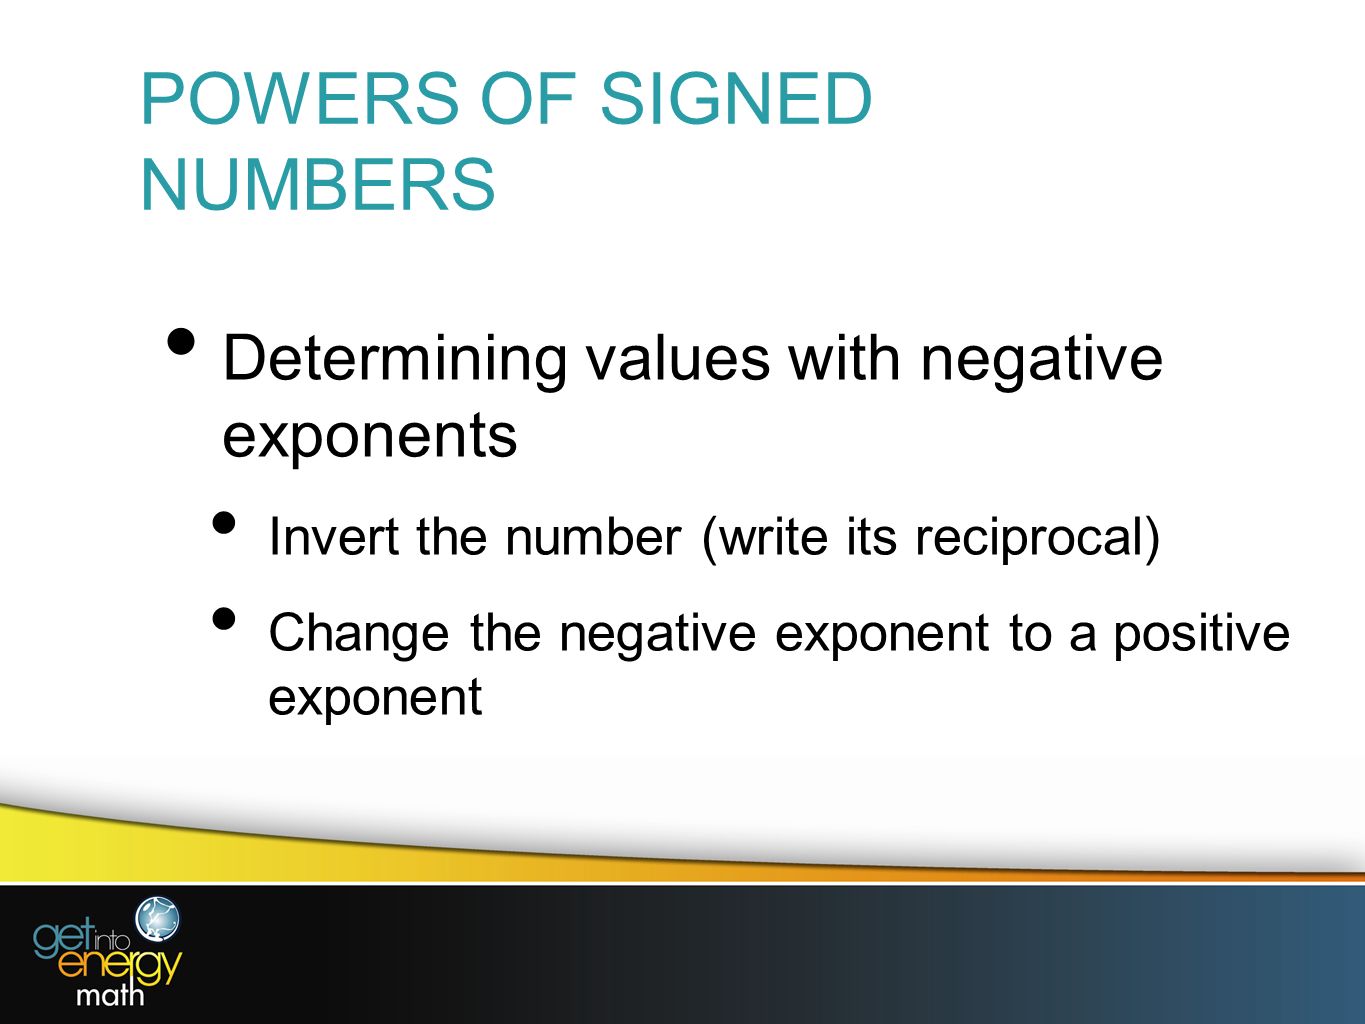 POWERS OF SIGNED NUMBERS